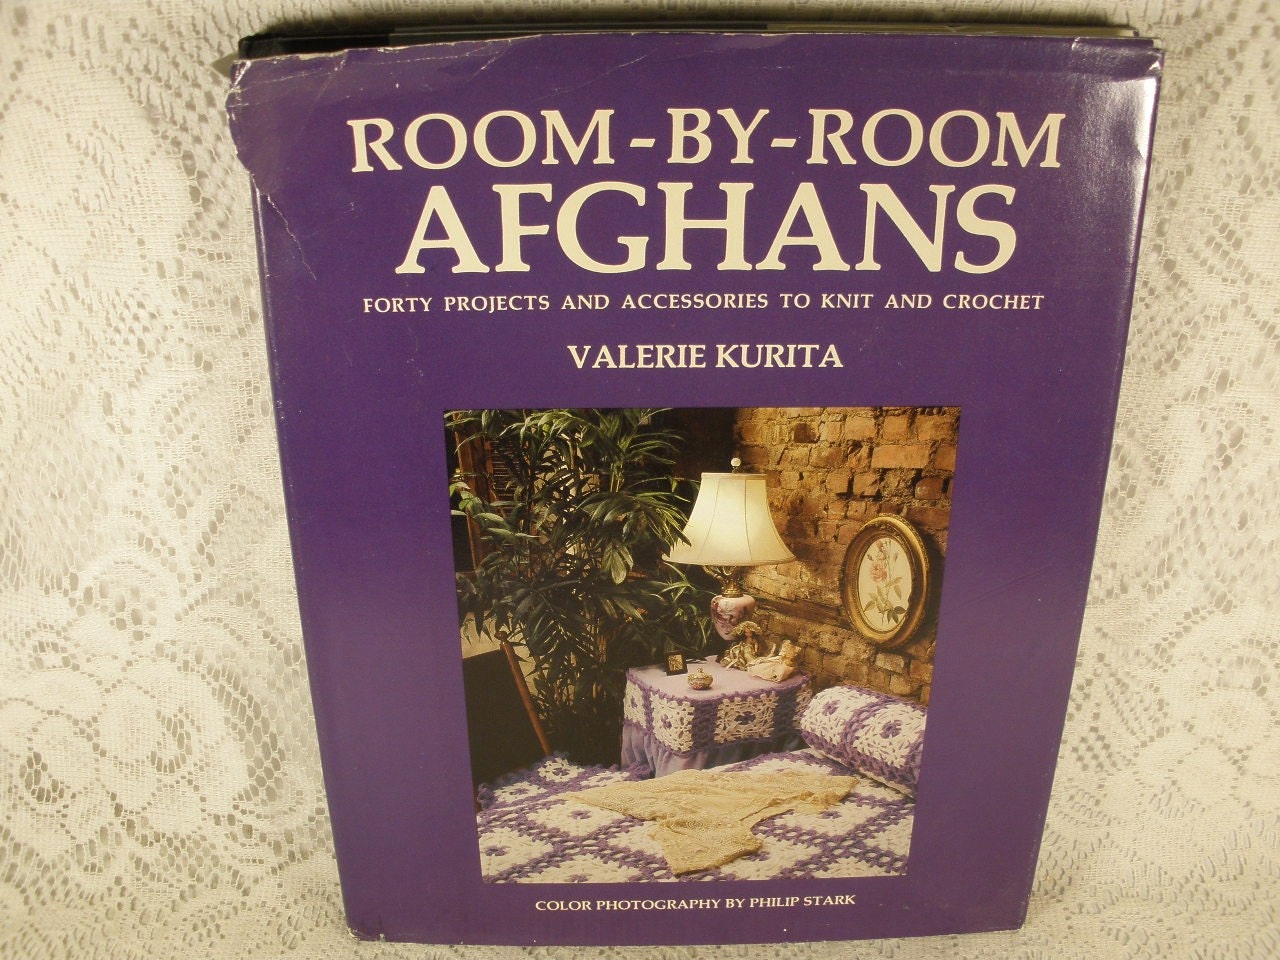 Room-By-Room Afghans: Forty Projects and Accessories to Knit and Crochet Valerie Kurita